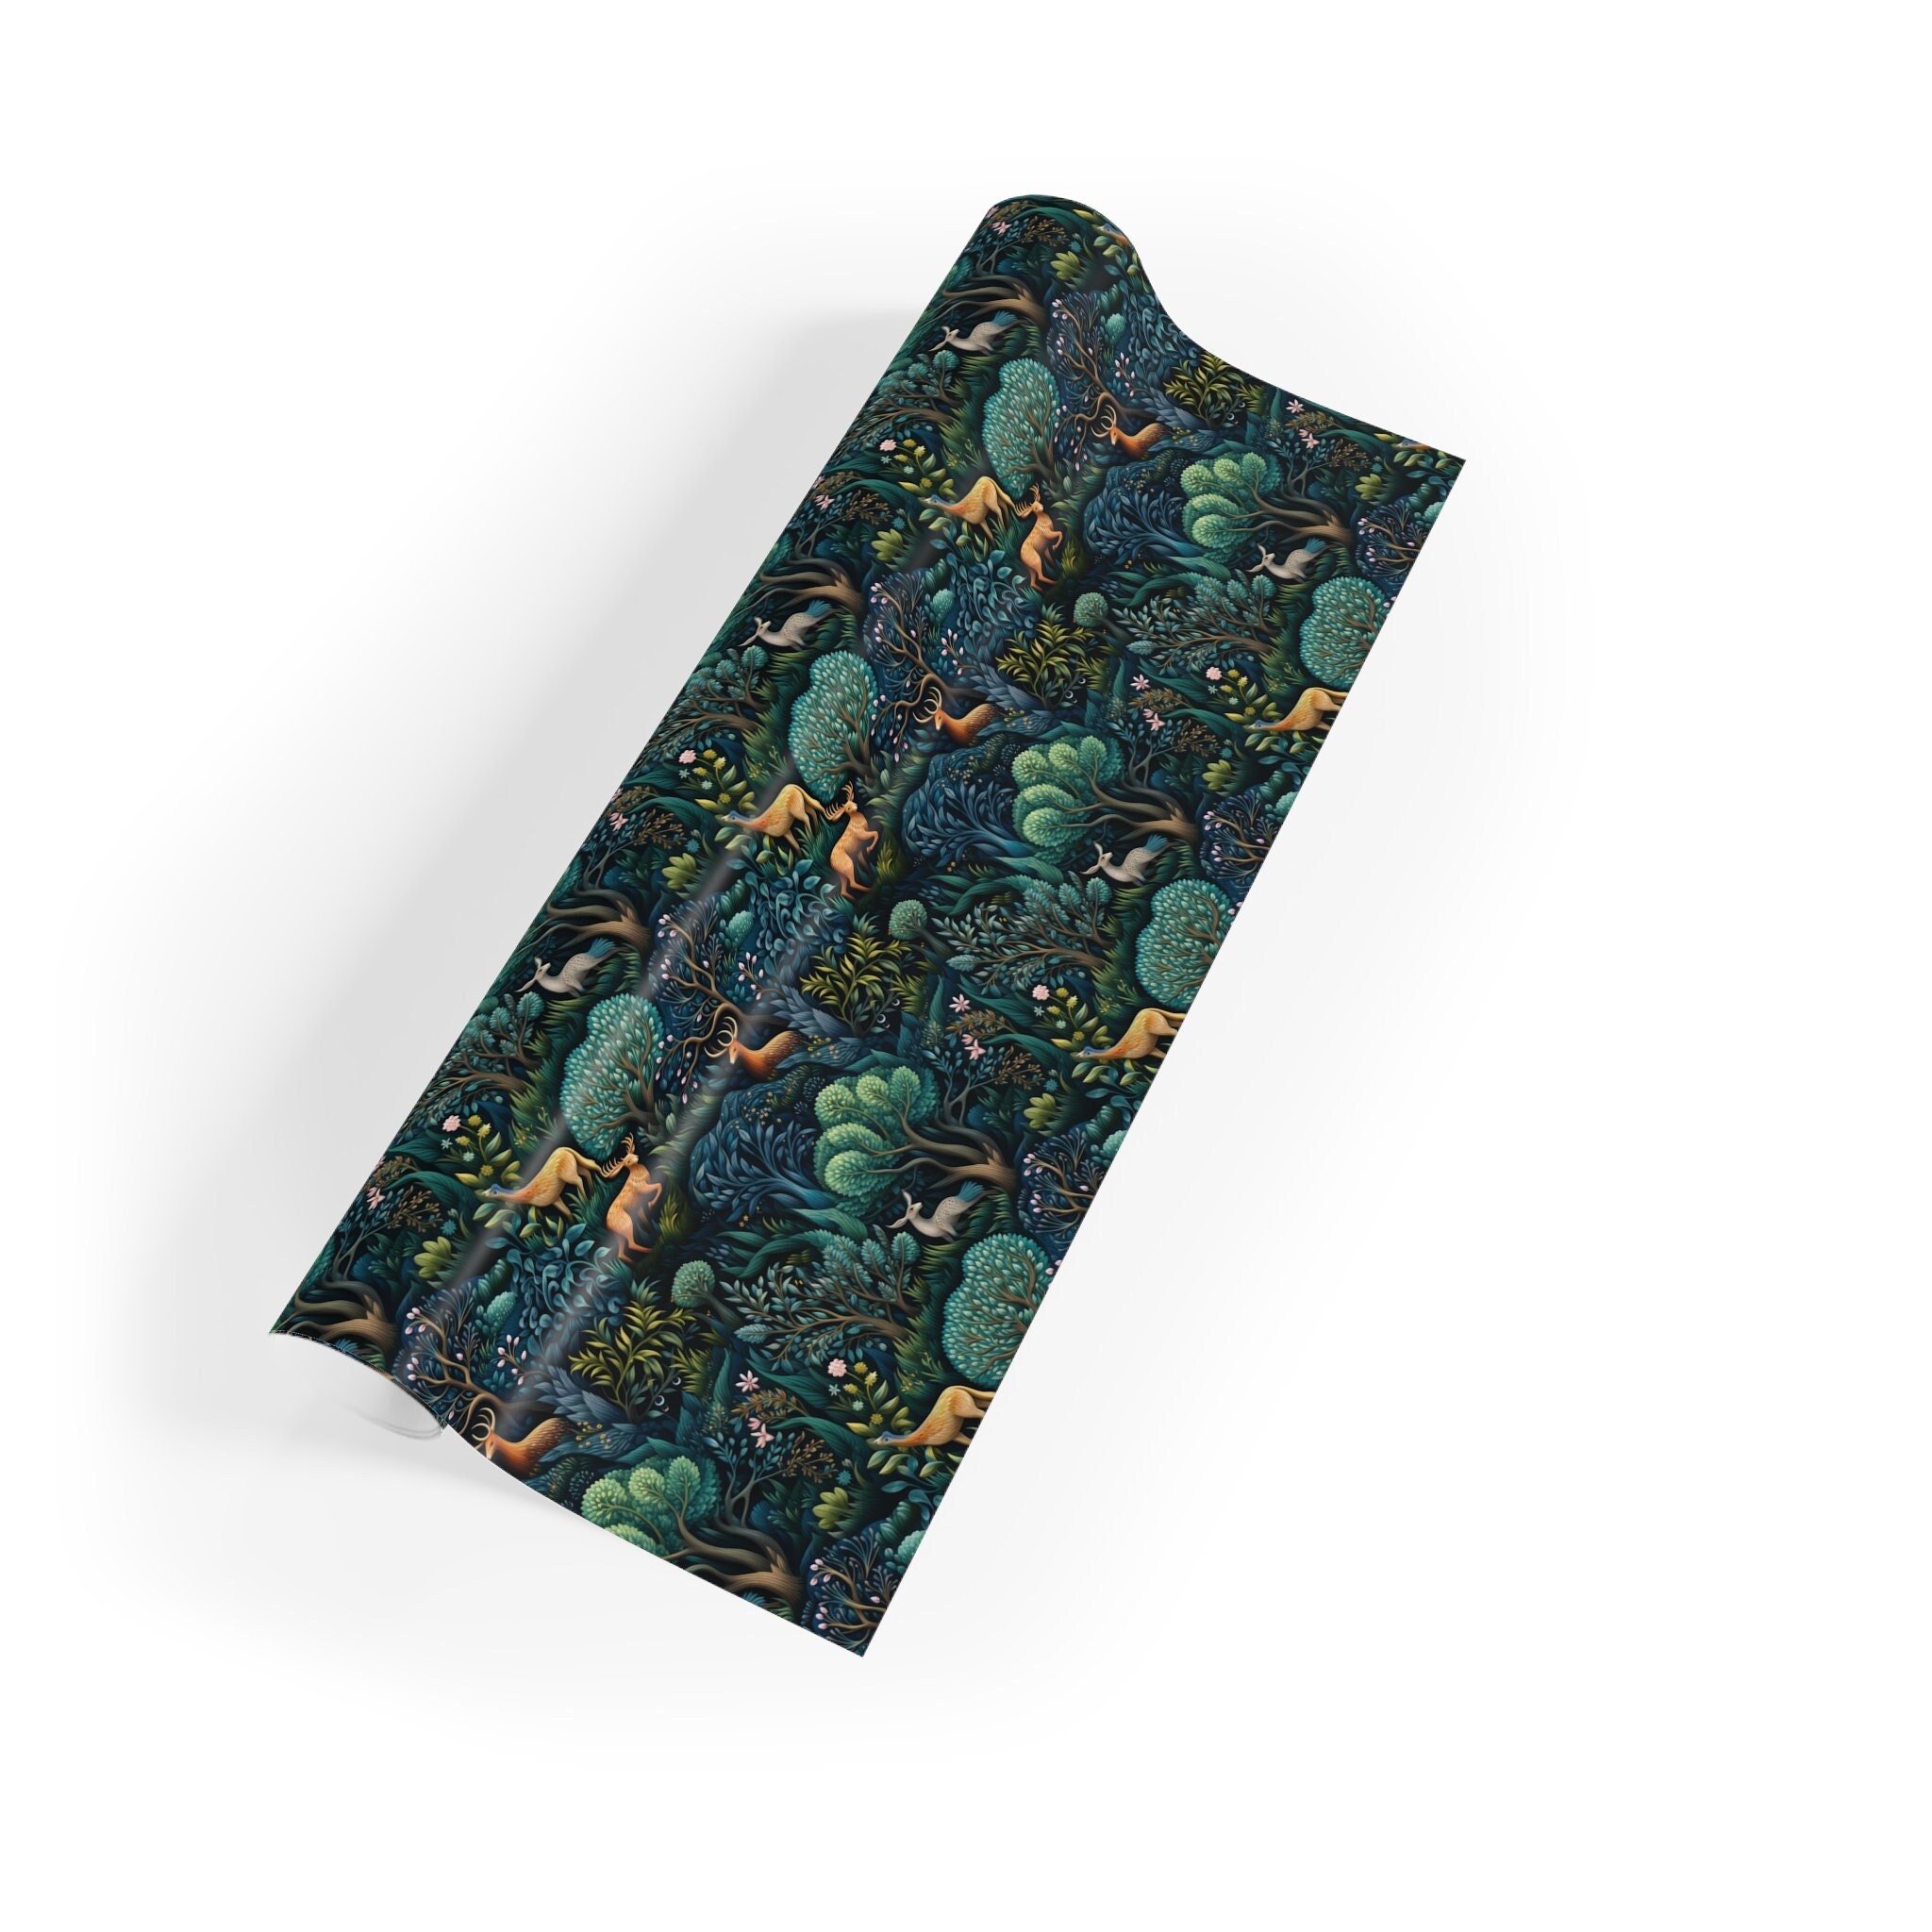 Magical Forest Wrapping Paper Fairy Woodland Animal Wrapping Paper Mushroom  Celestial Gift Wrap 